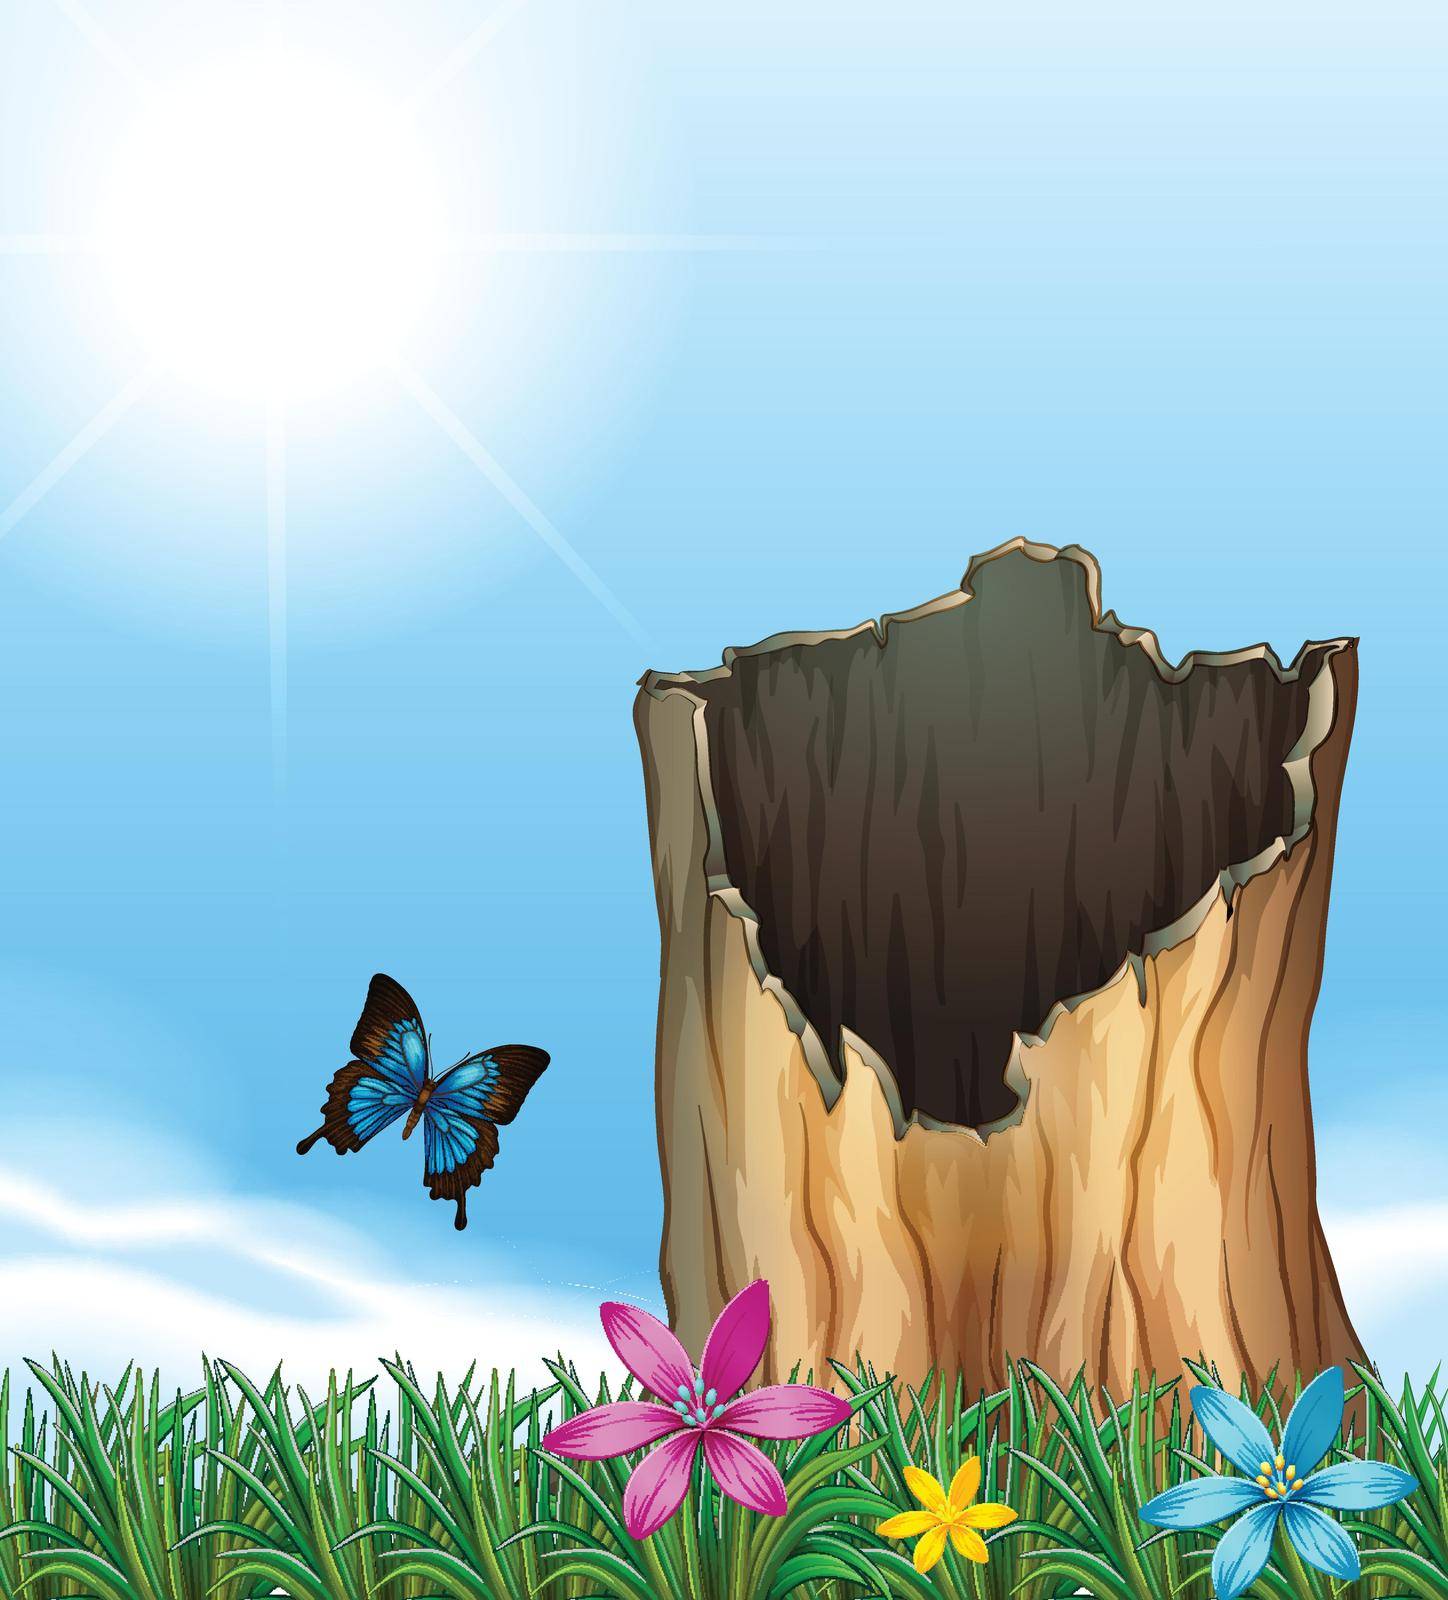 Illustration of a stump of a tree